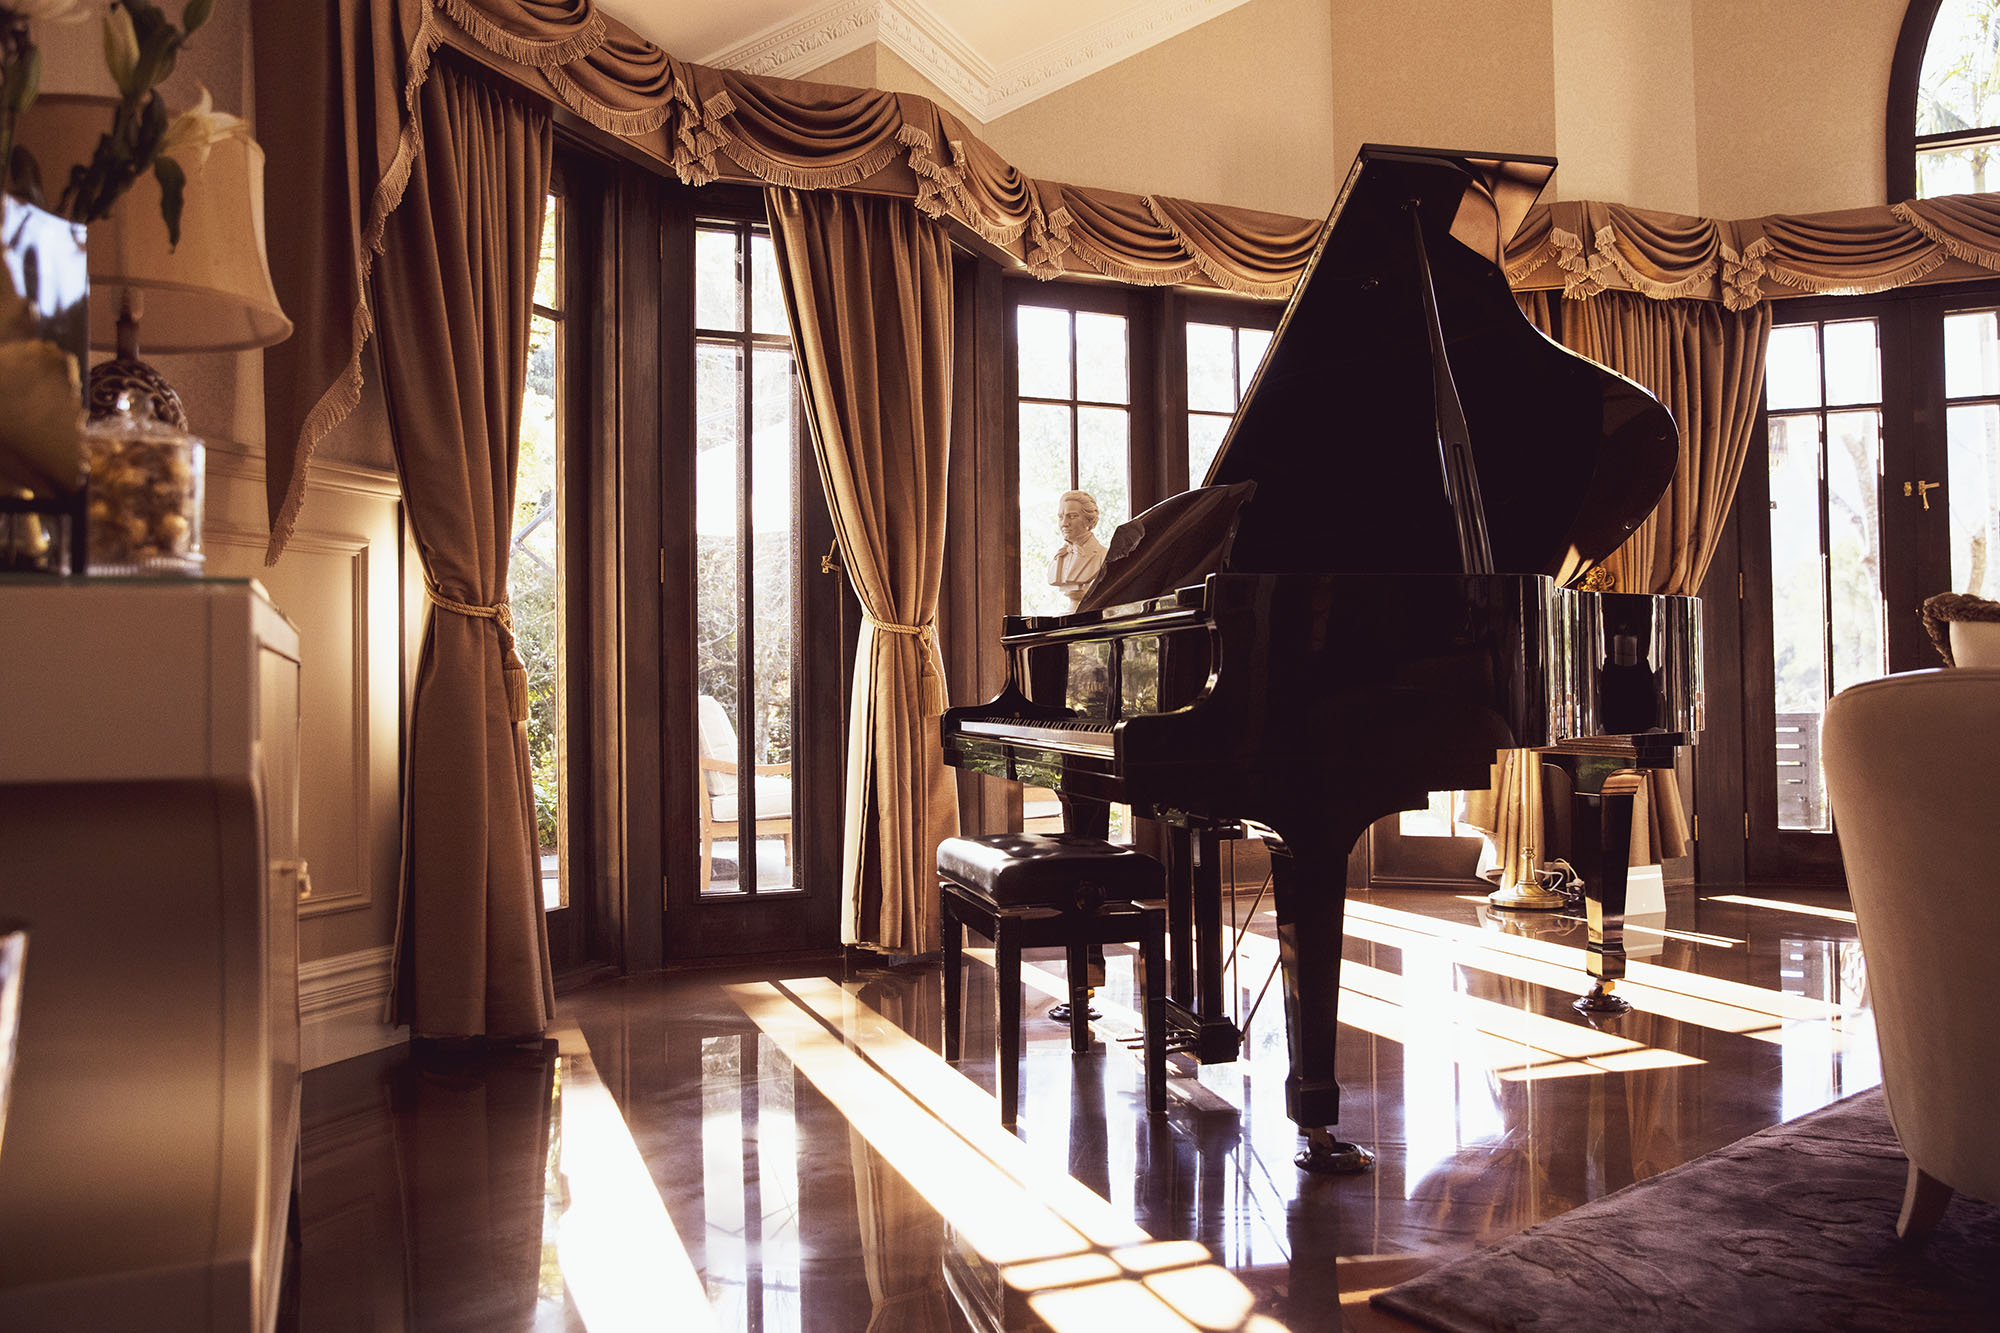 Hermitage Estate living room with baby grand piano and spectacular views out over the terrace, lush gardens and escarpment